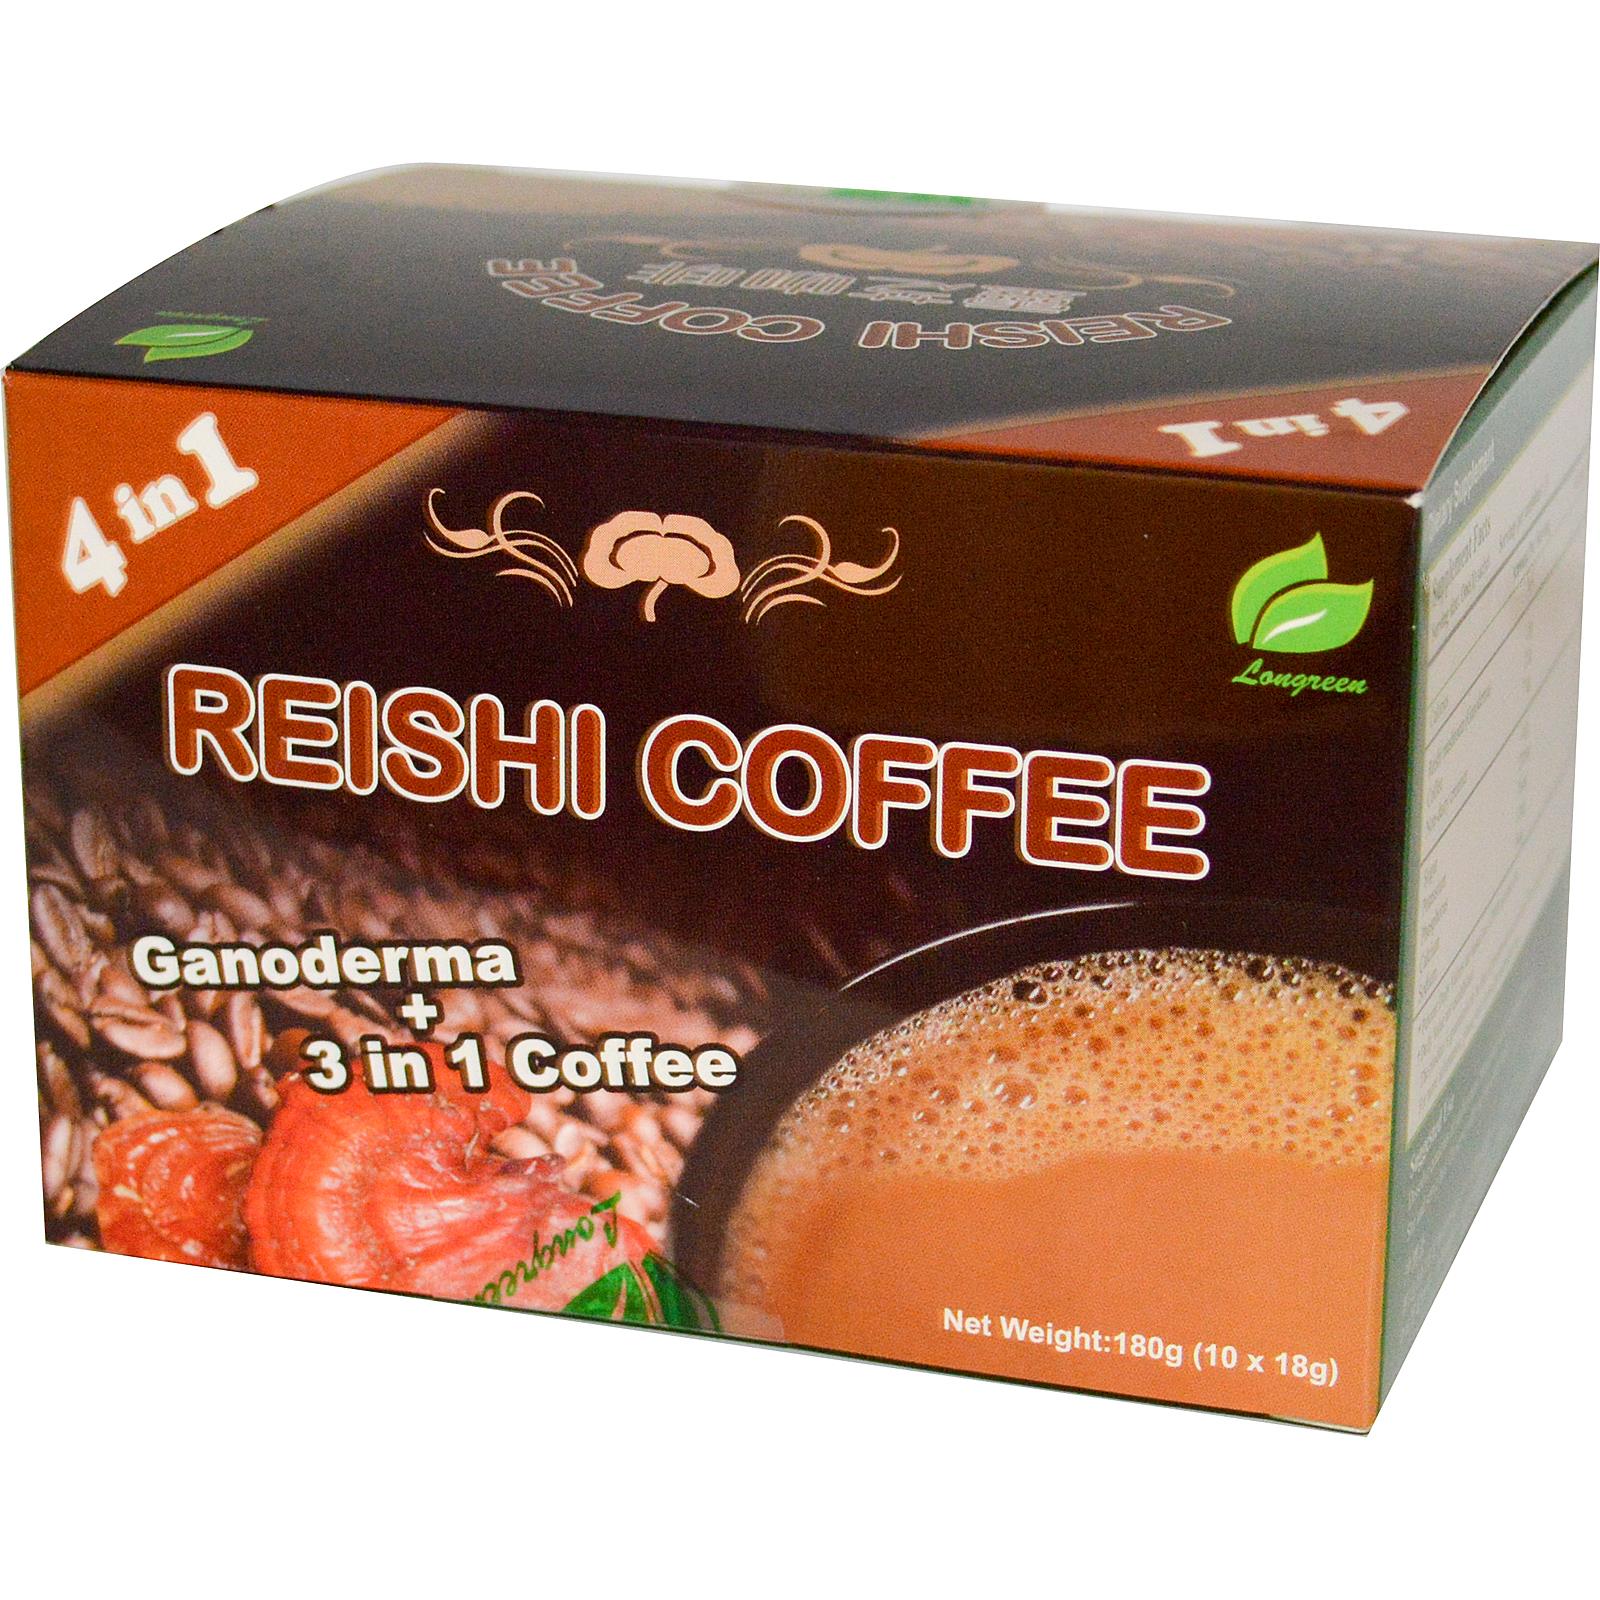 The United States imported Longreen Reishi Coffee Reishi instant Coffee 4 in 1 a long Coffee